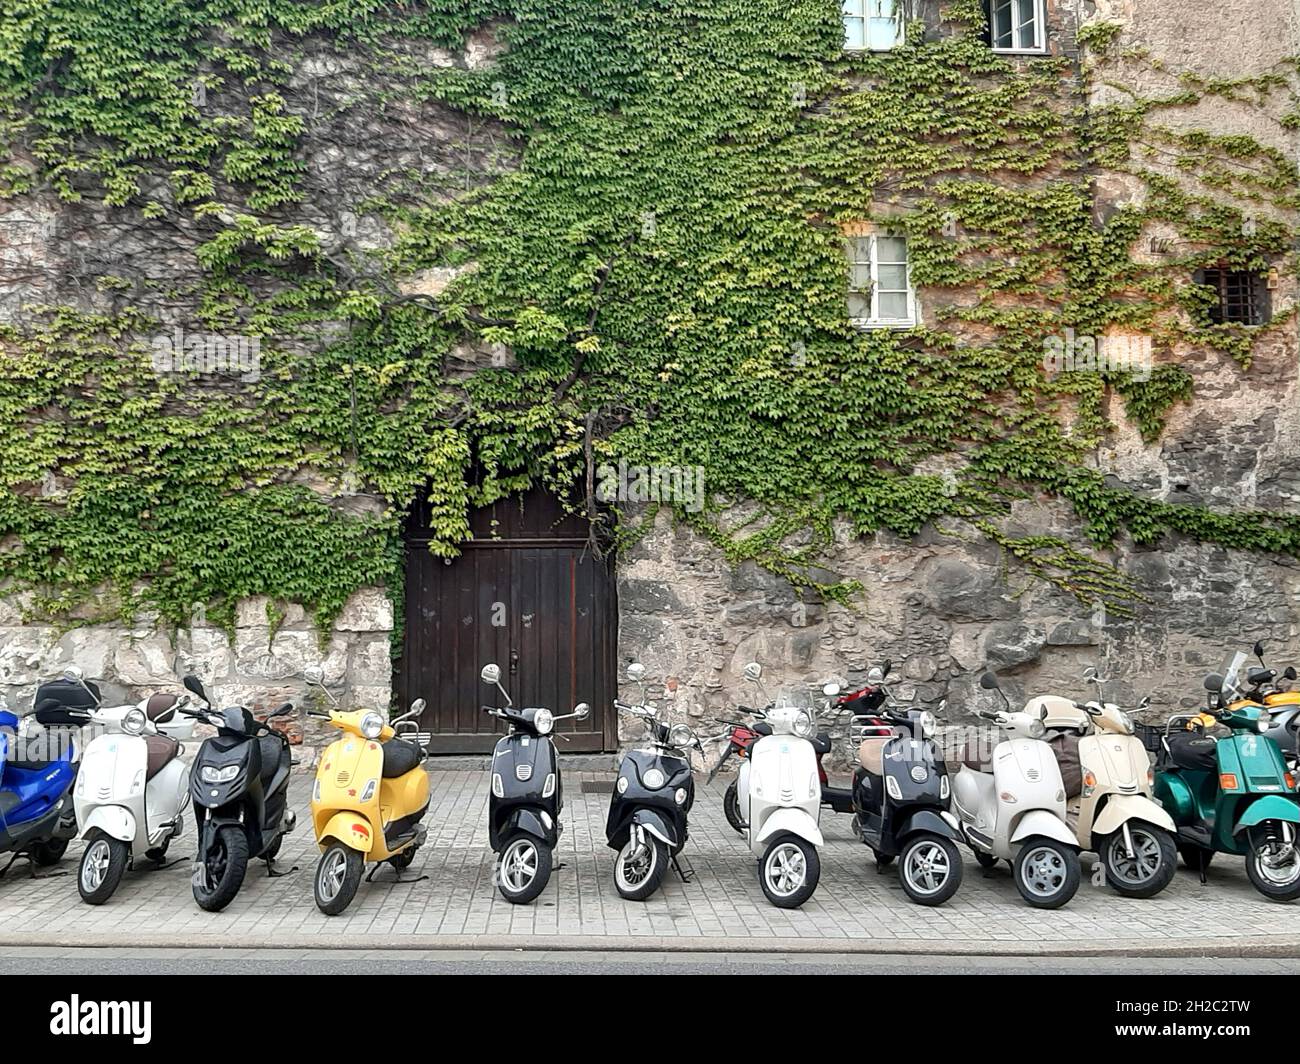 parking lot for motor-scooters, Germany Stock Photo